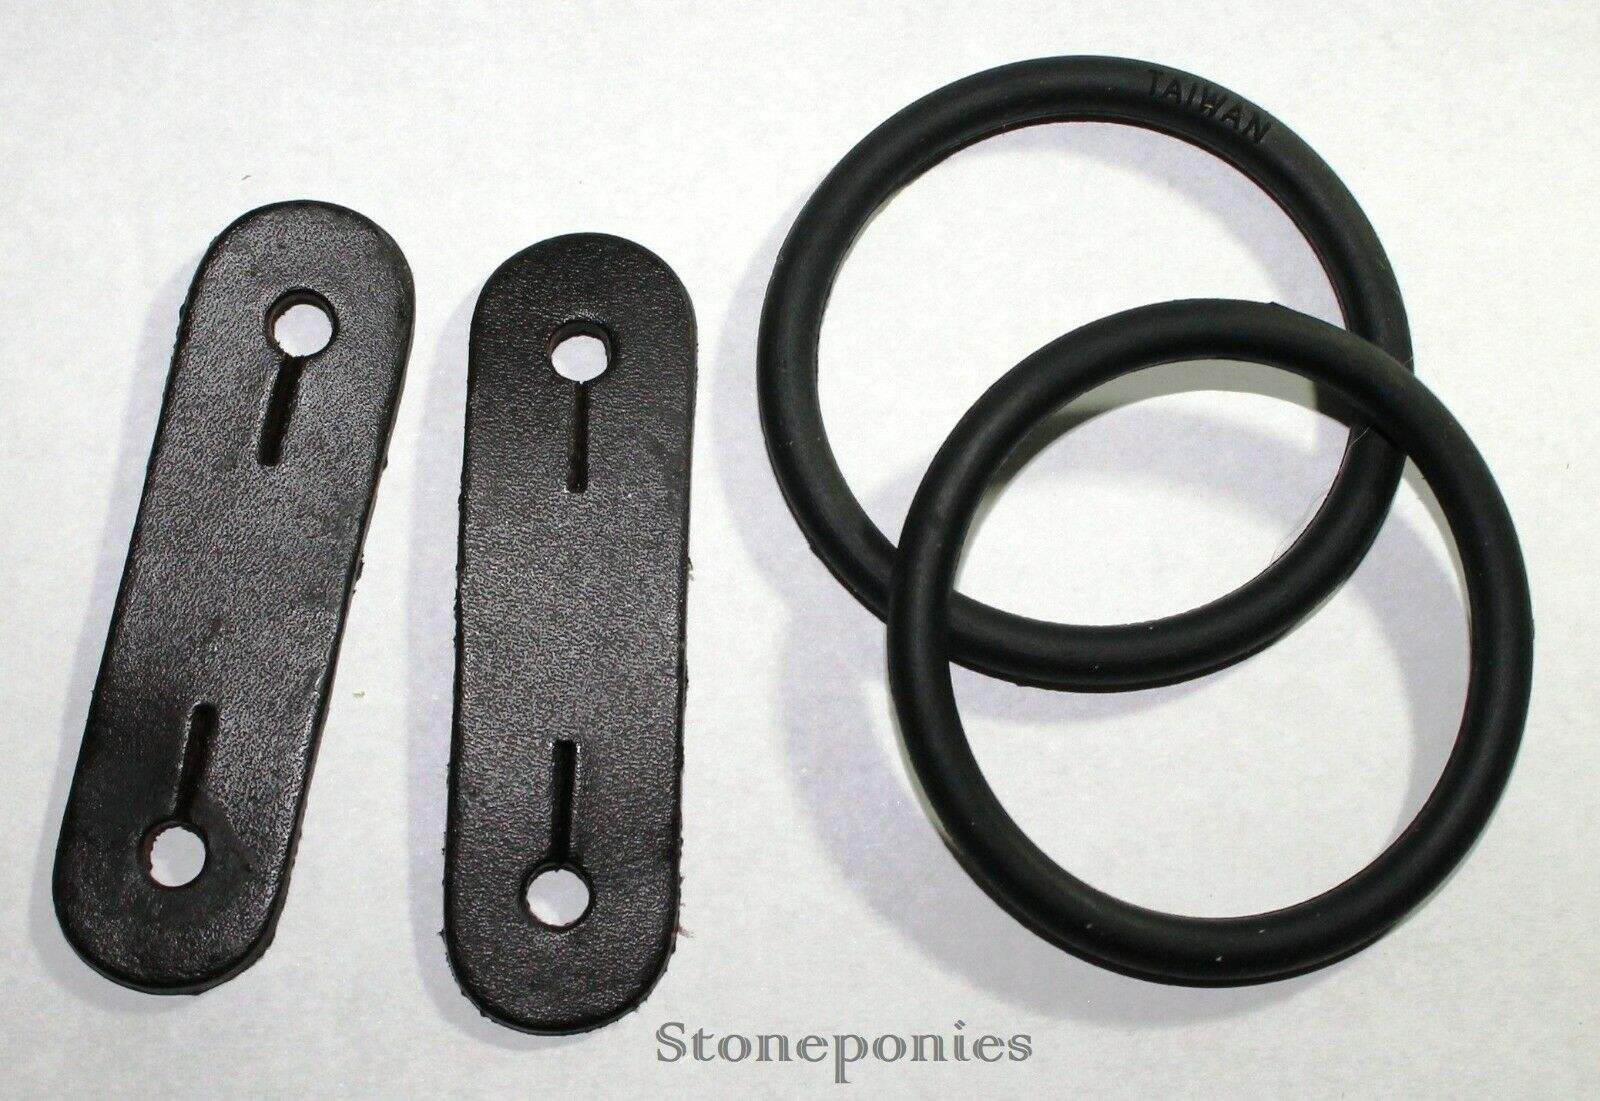 Replacement Leathers Or Rubber Rings For Peacock Breakaway Safety Stirrup Irons